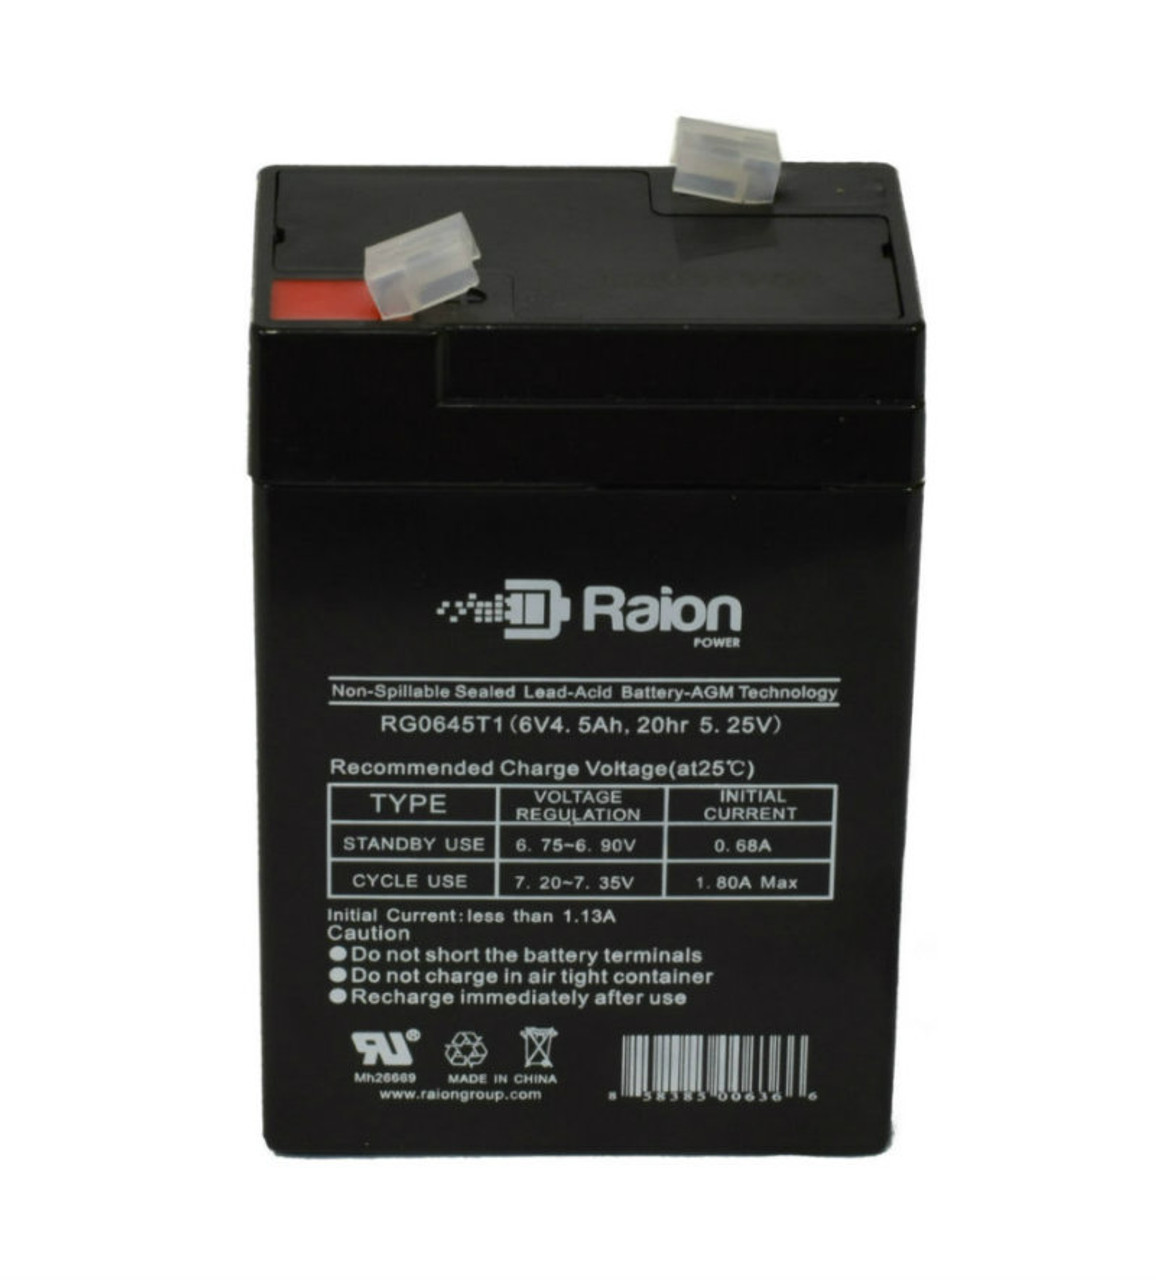 Raion Power RG0645T1 Replacement Battery Cartridge for FirstPower FP645